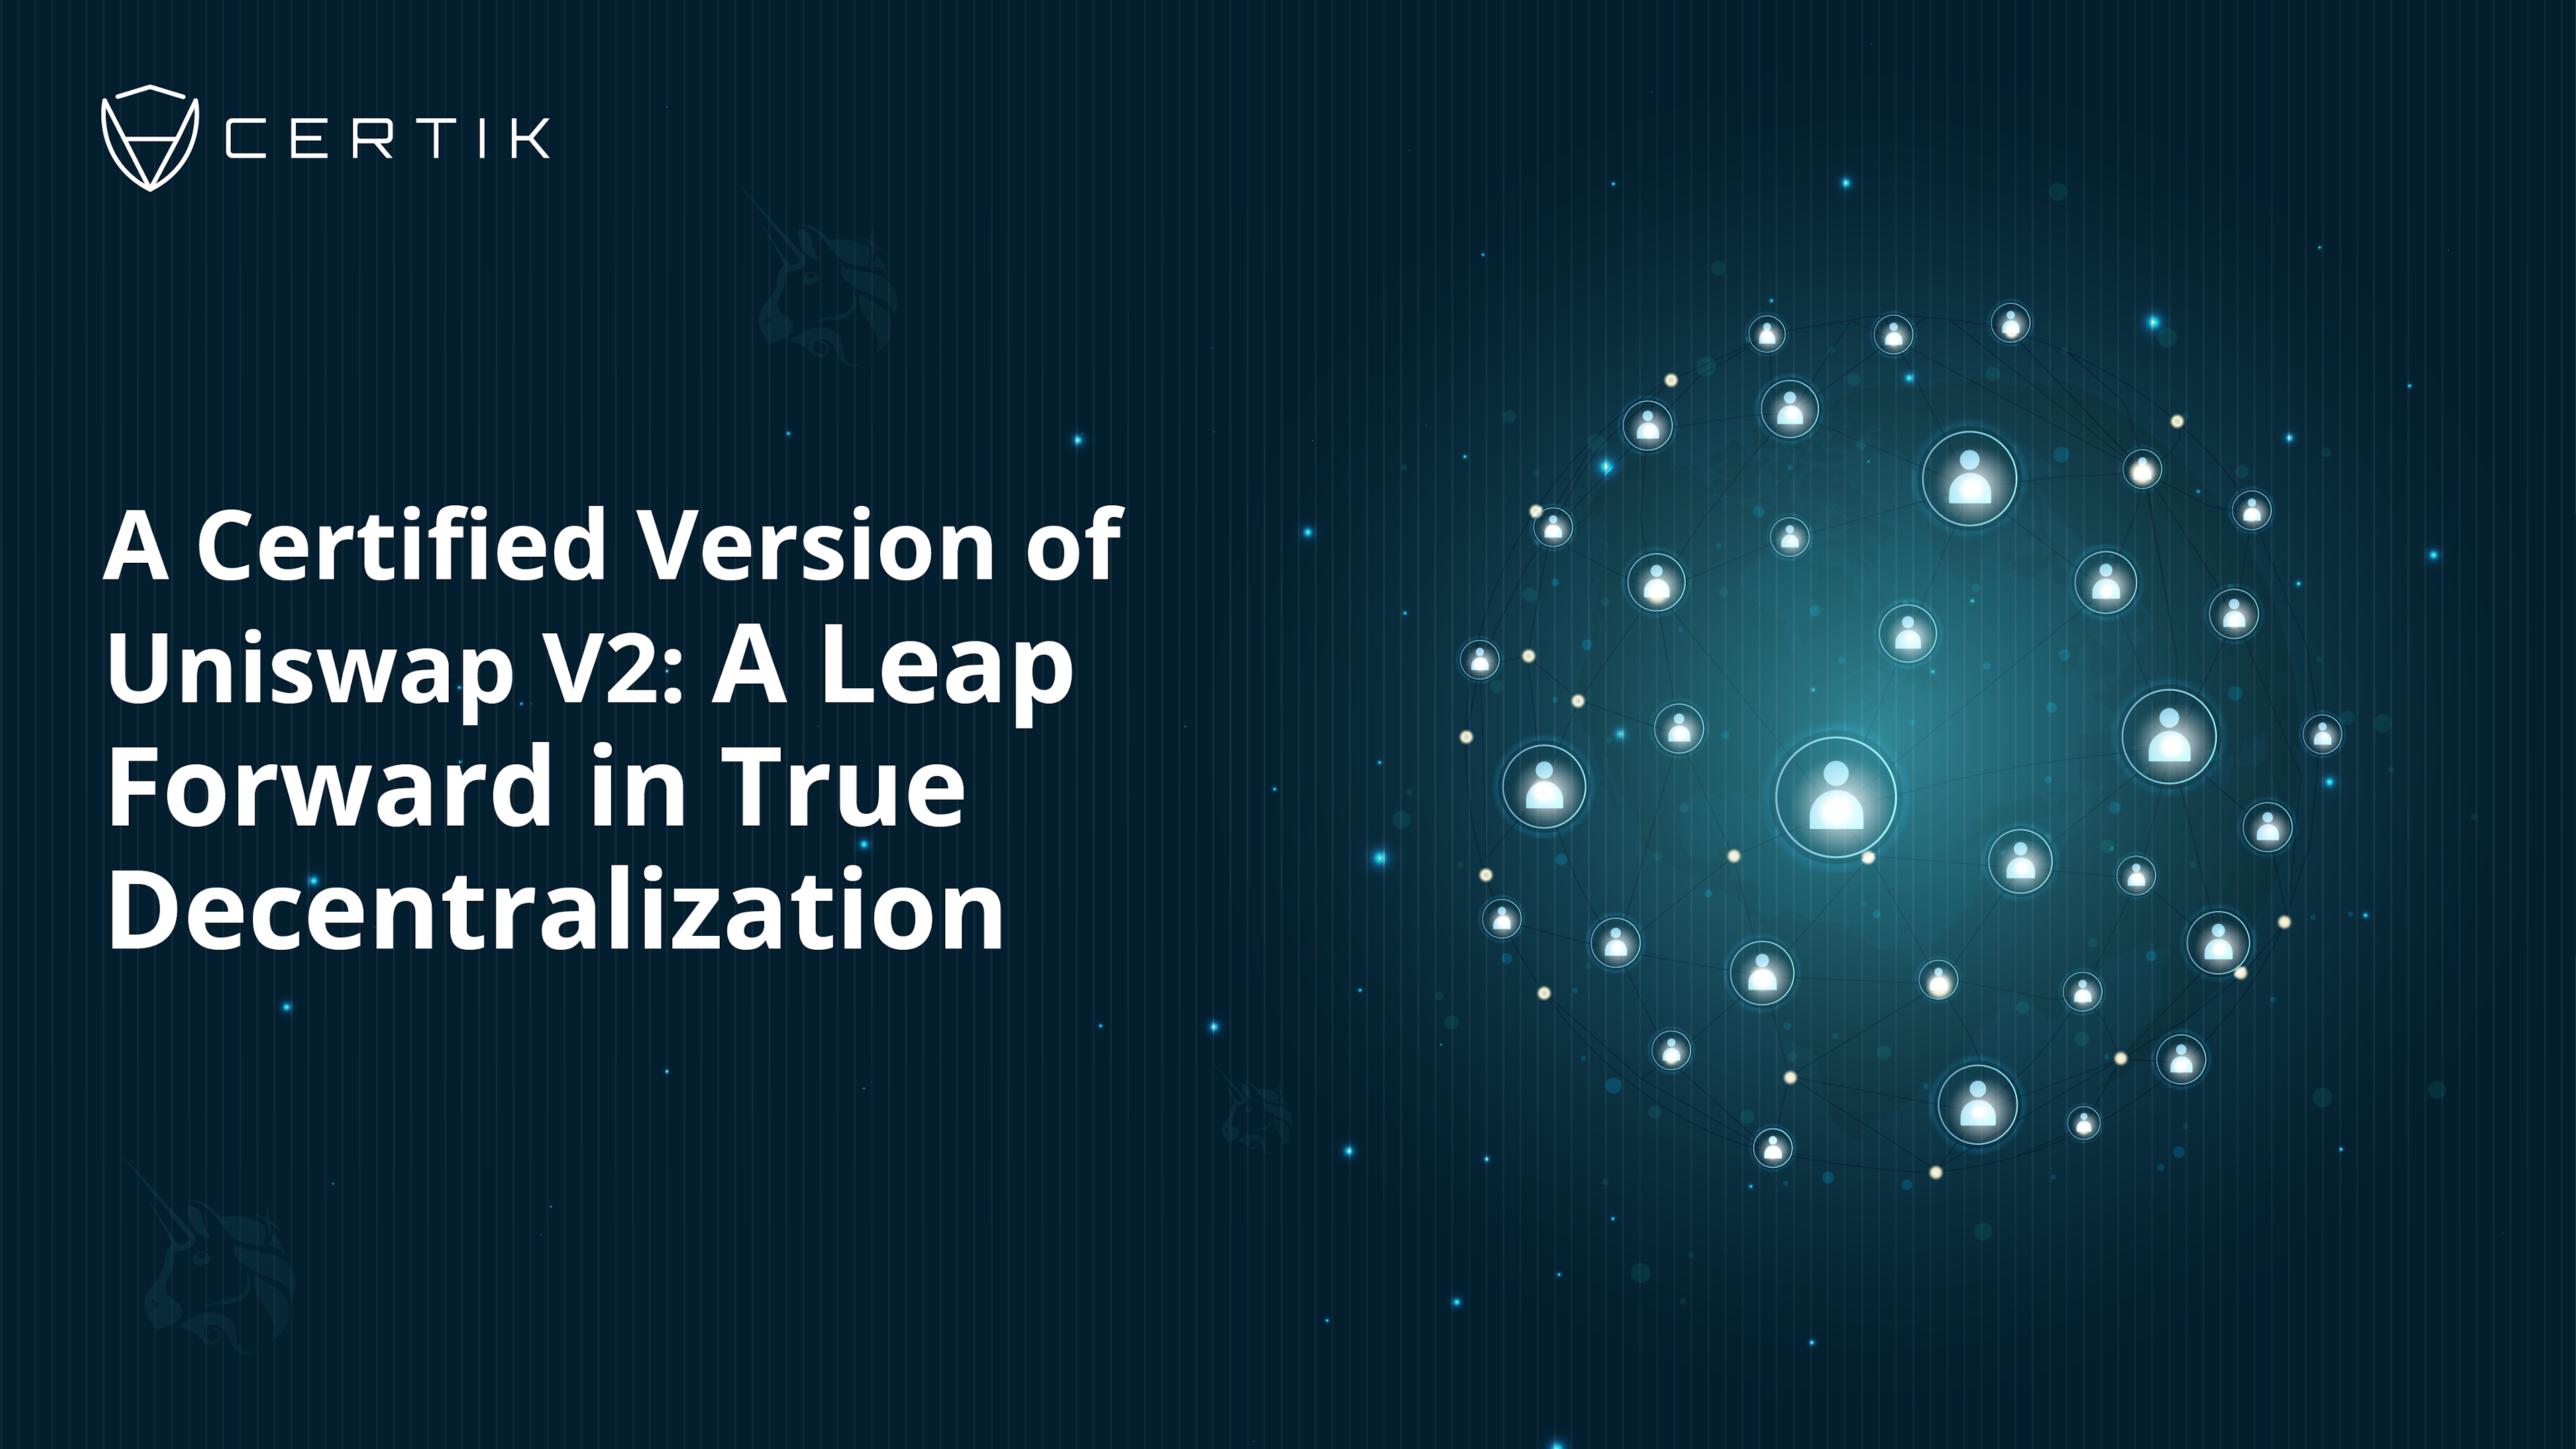 A Certified Version of the Uniswap V2 Contract: A Leap Forward in True Decentralization